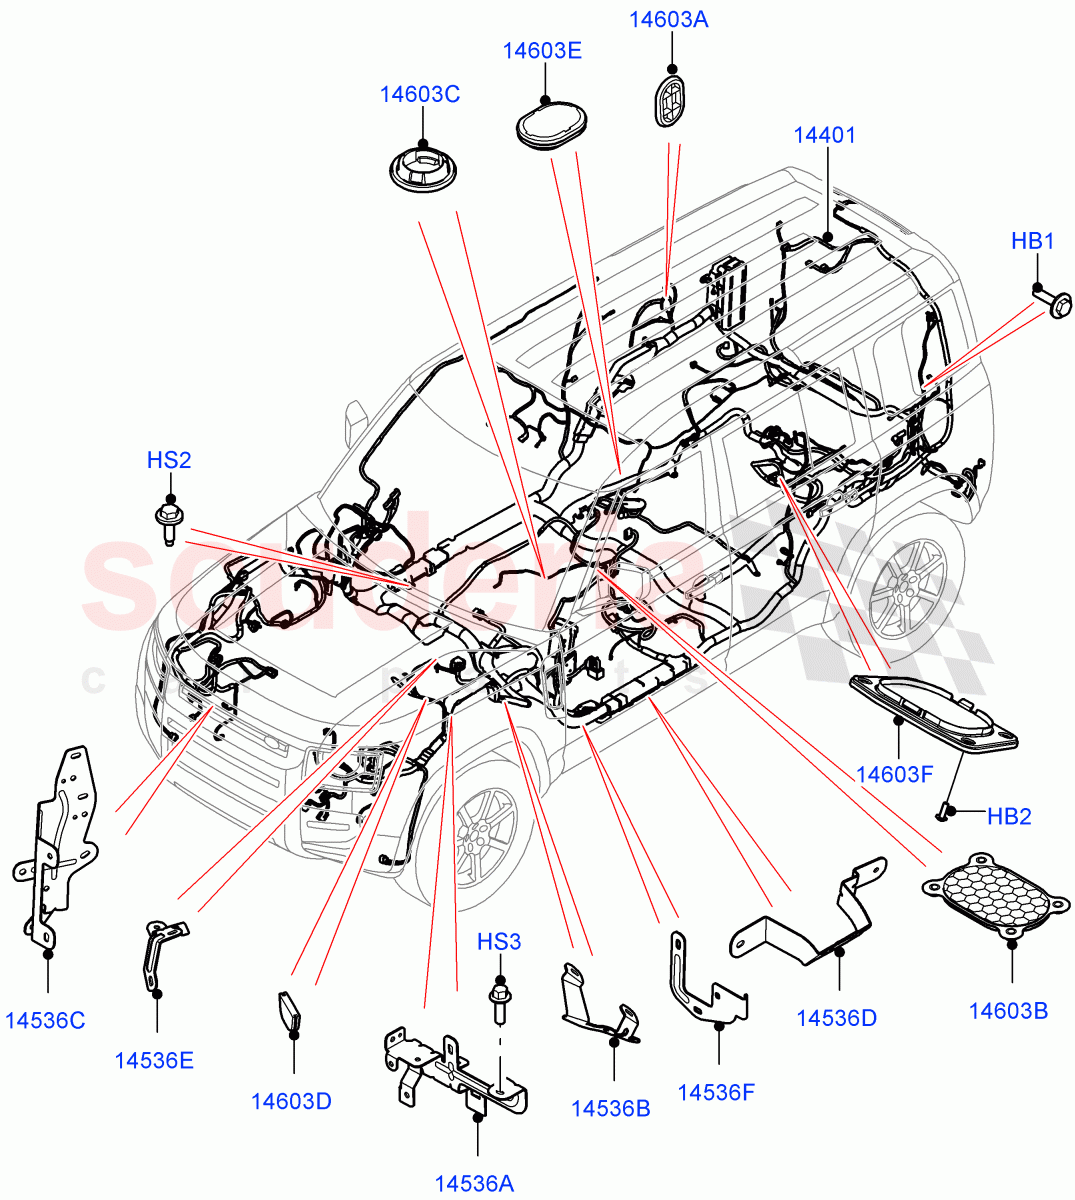 Electrical Wiring - Engine And Dash(Main Harness) of Land Rover Land Rover Defender (2020+) [2.0 Turbo Diesel]